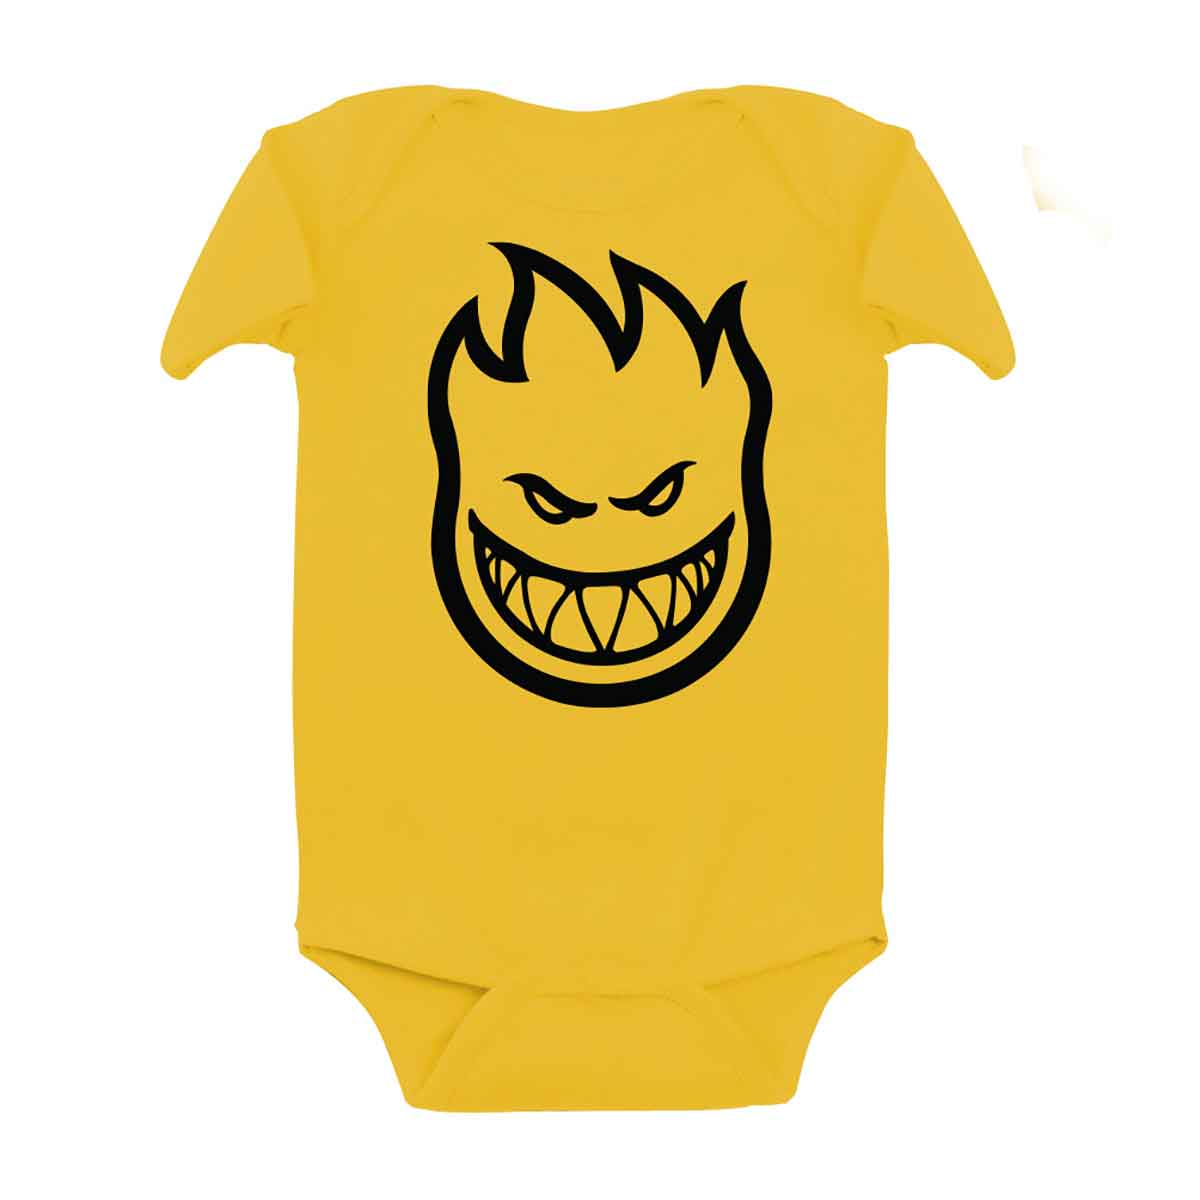 Bighead Infant Onesie BLK/YLW (size options listed)